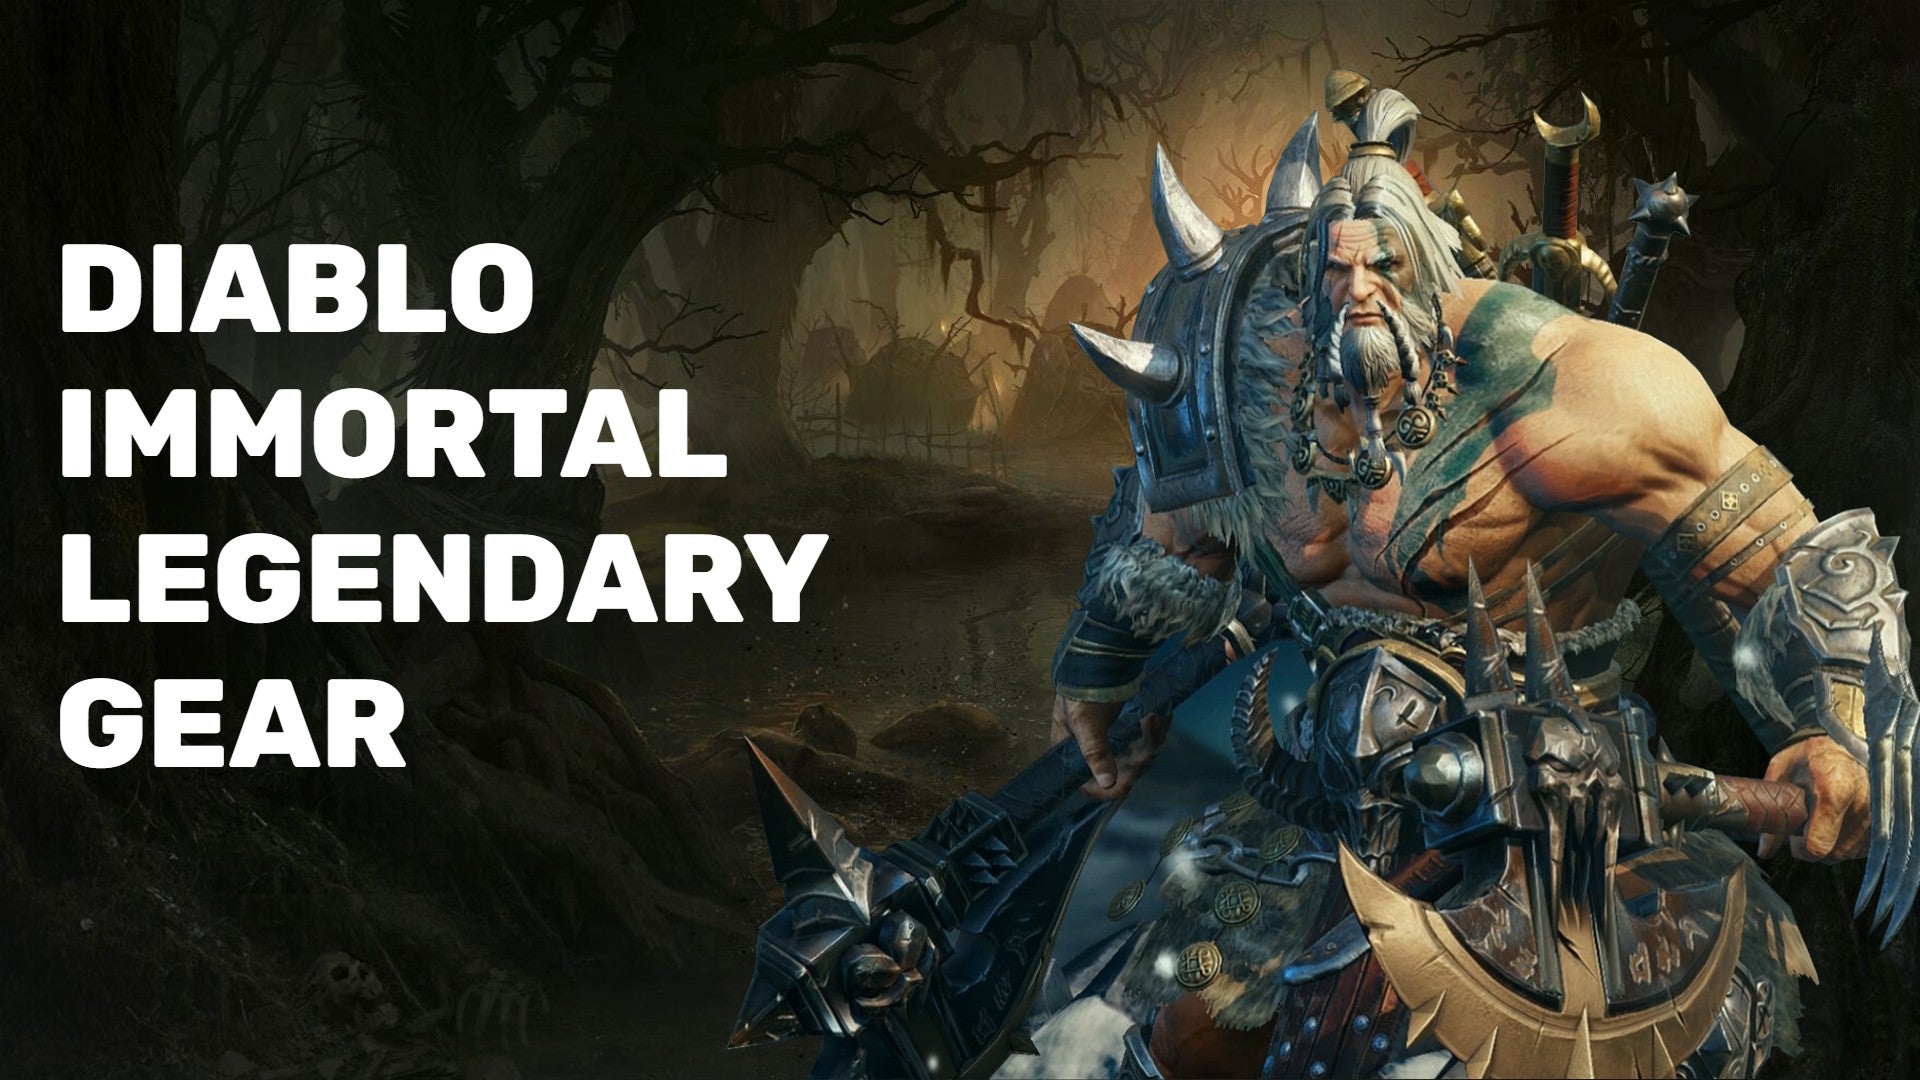 Diablo Immortal image showing a Barbarian on the right and the words "Diablo Immortal Legendary Gear" on the left.